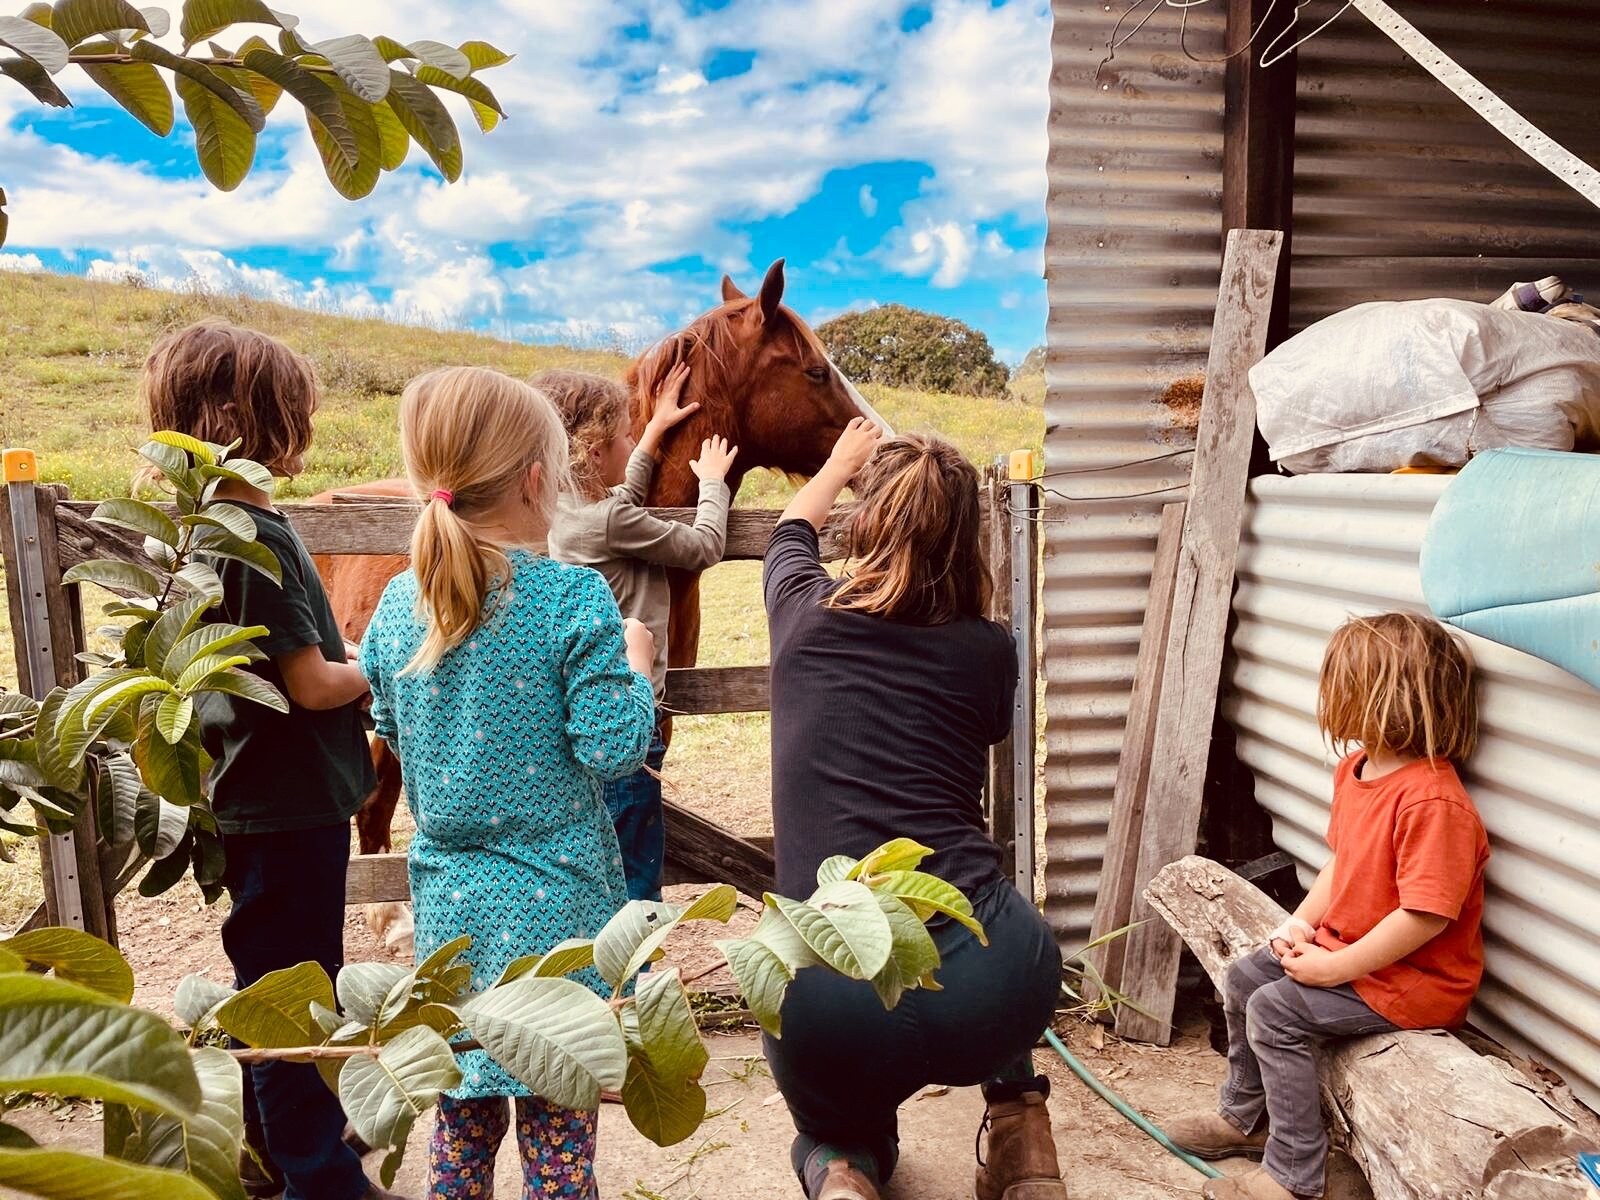 Breathwork meditation cacao ceremony mindfulness Love Connection loving kindness woman’s circle sacred sisters one with nature conscious Connections horse lover nature lover 43227.JPG